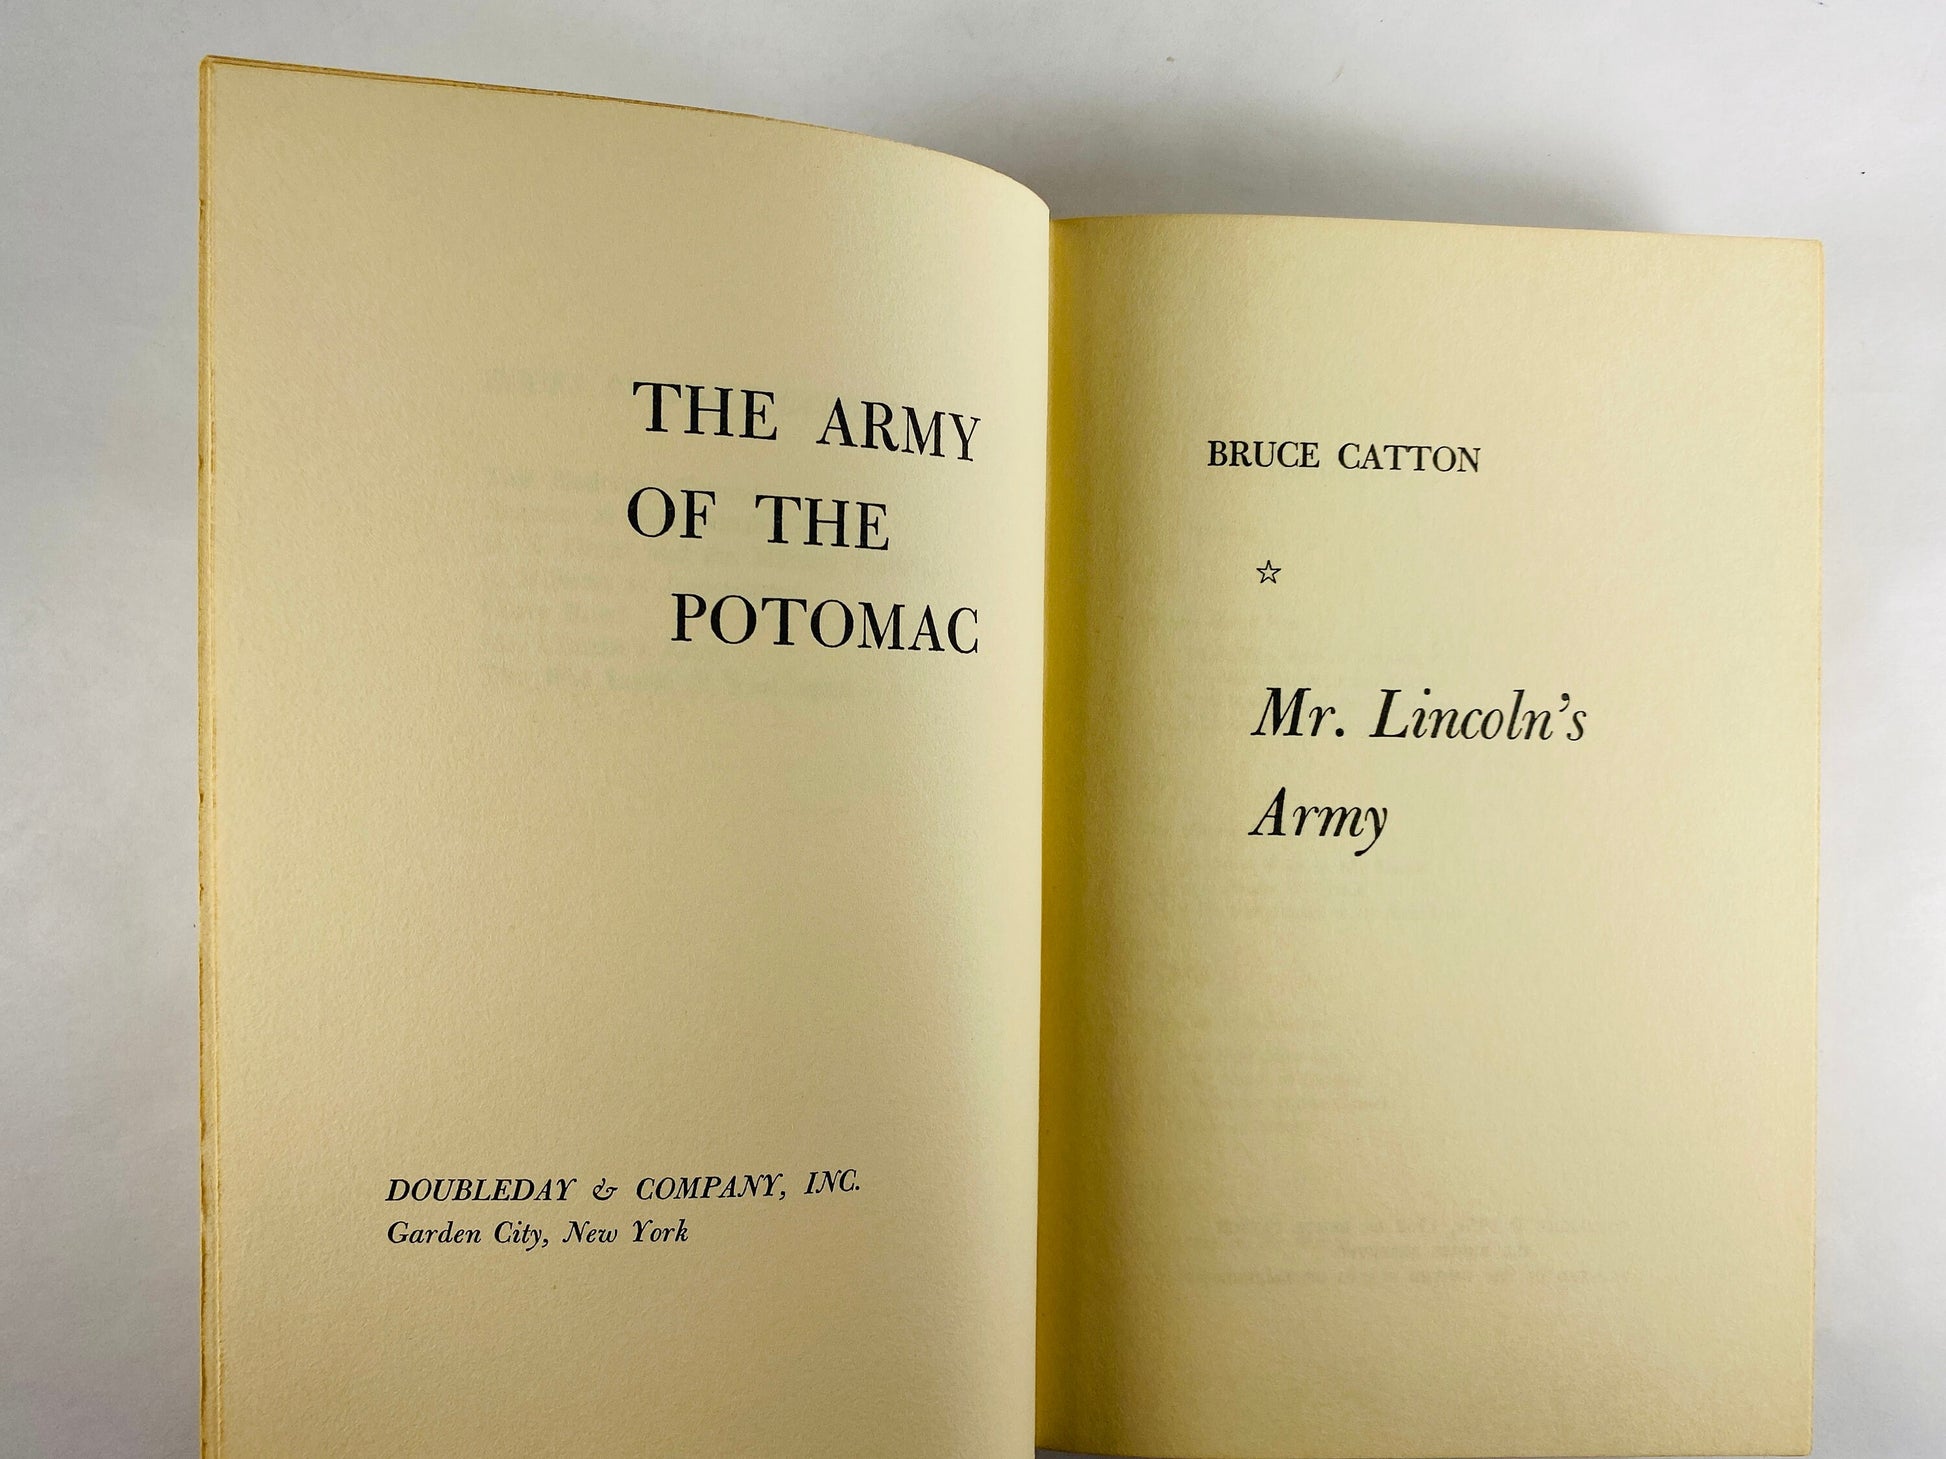 Army of the Potomac vintage book by Bruce Catton Mr Lincoln's Army circa 1962 Civil War Soldier Union